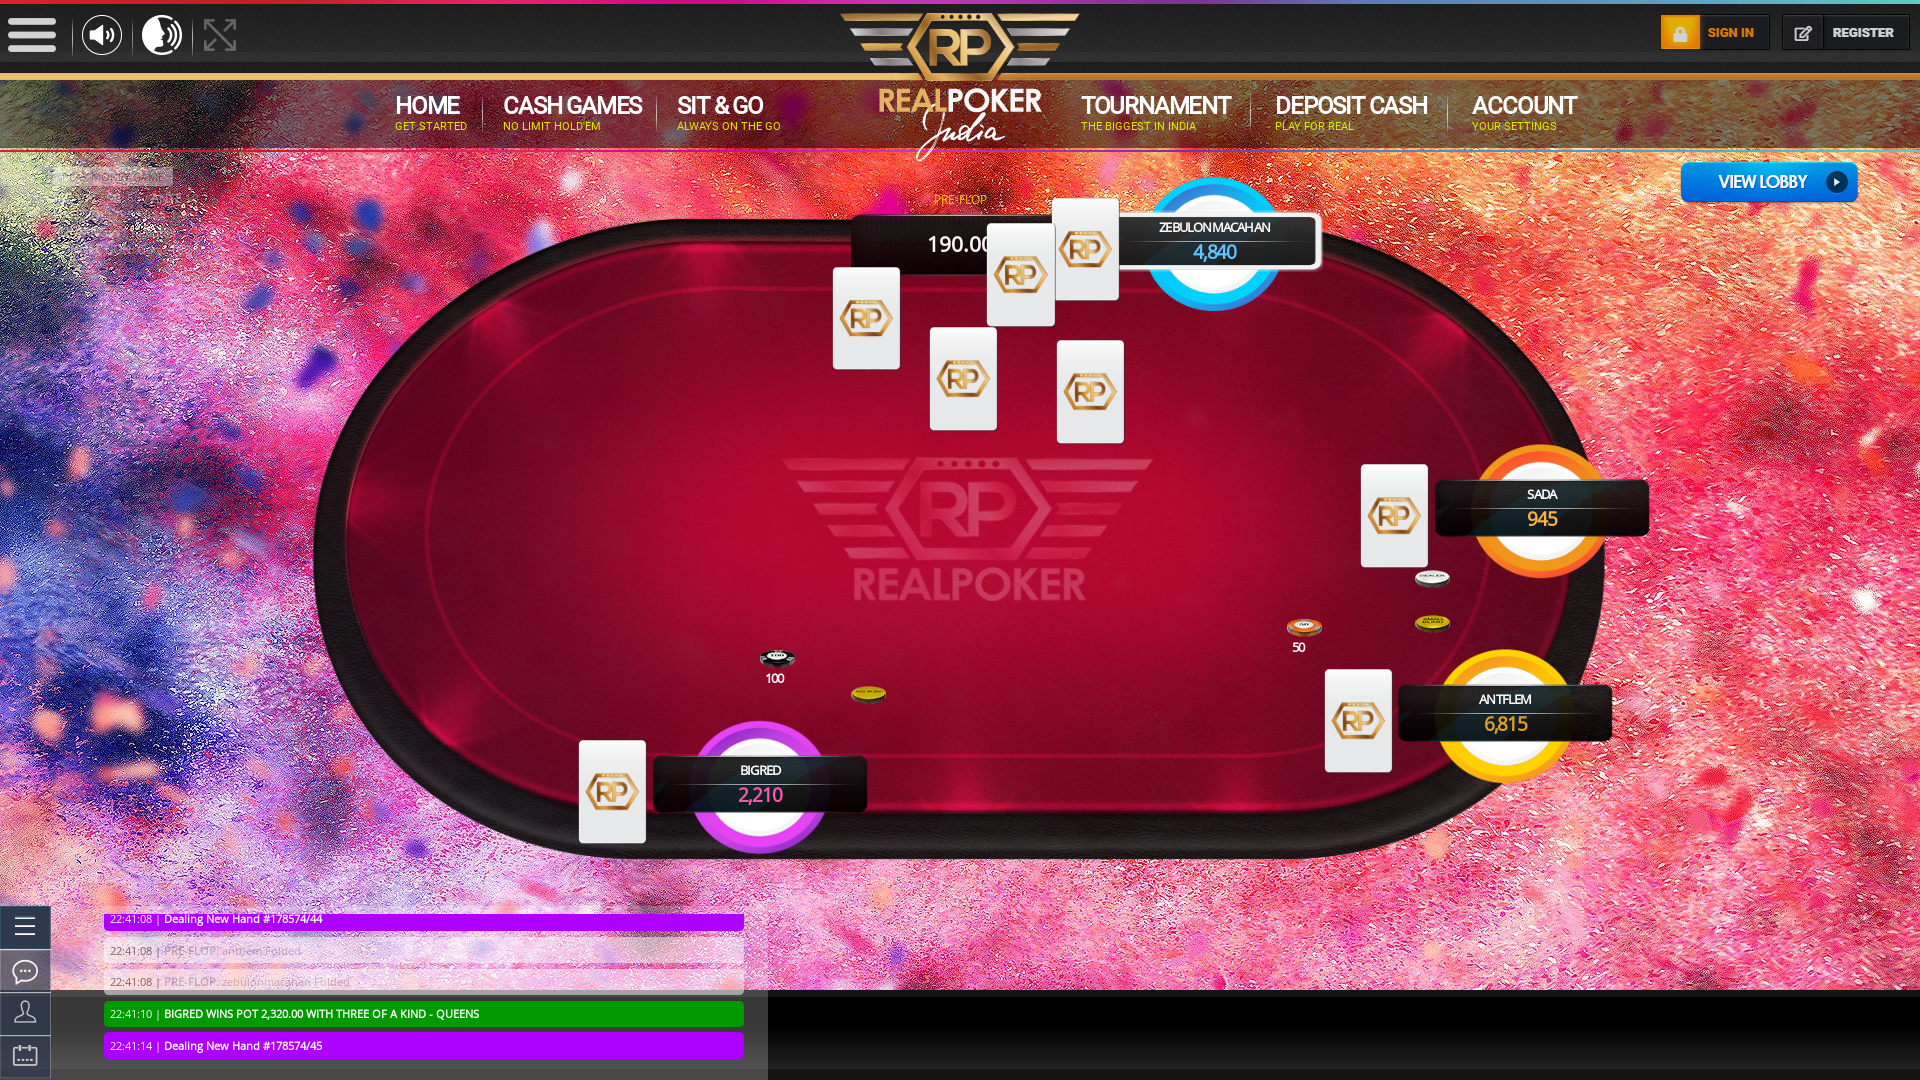 Indian 10 player poker in the 31st minute